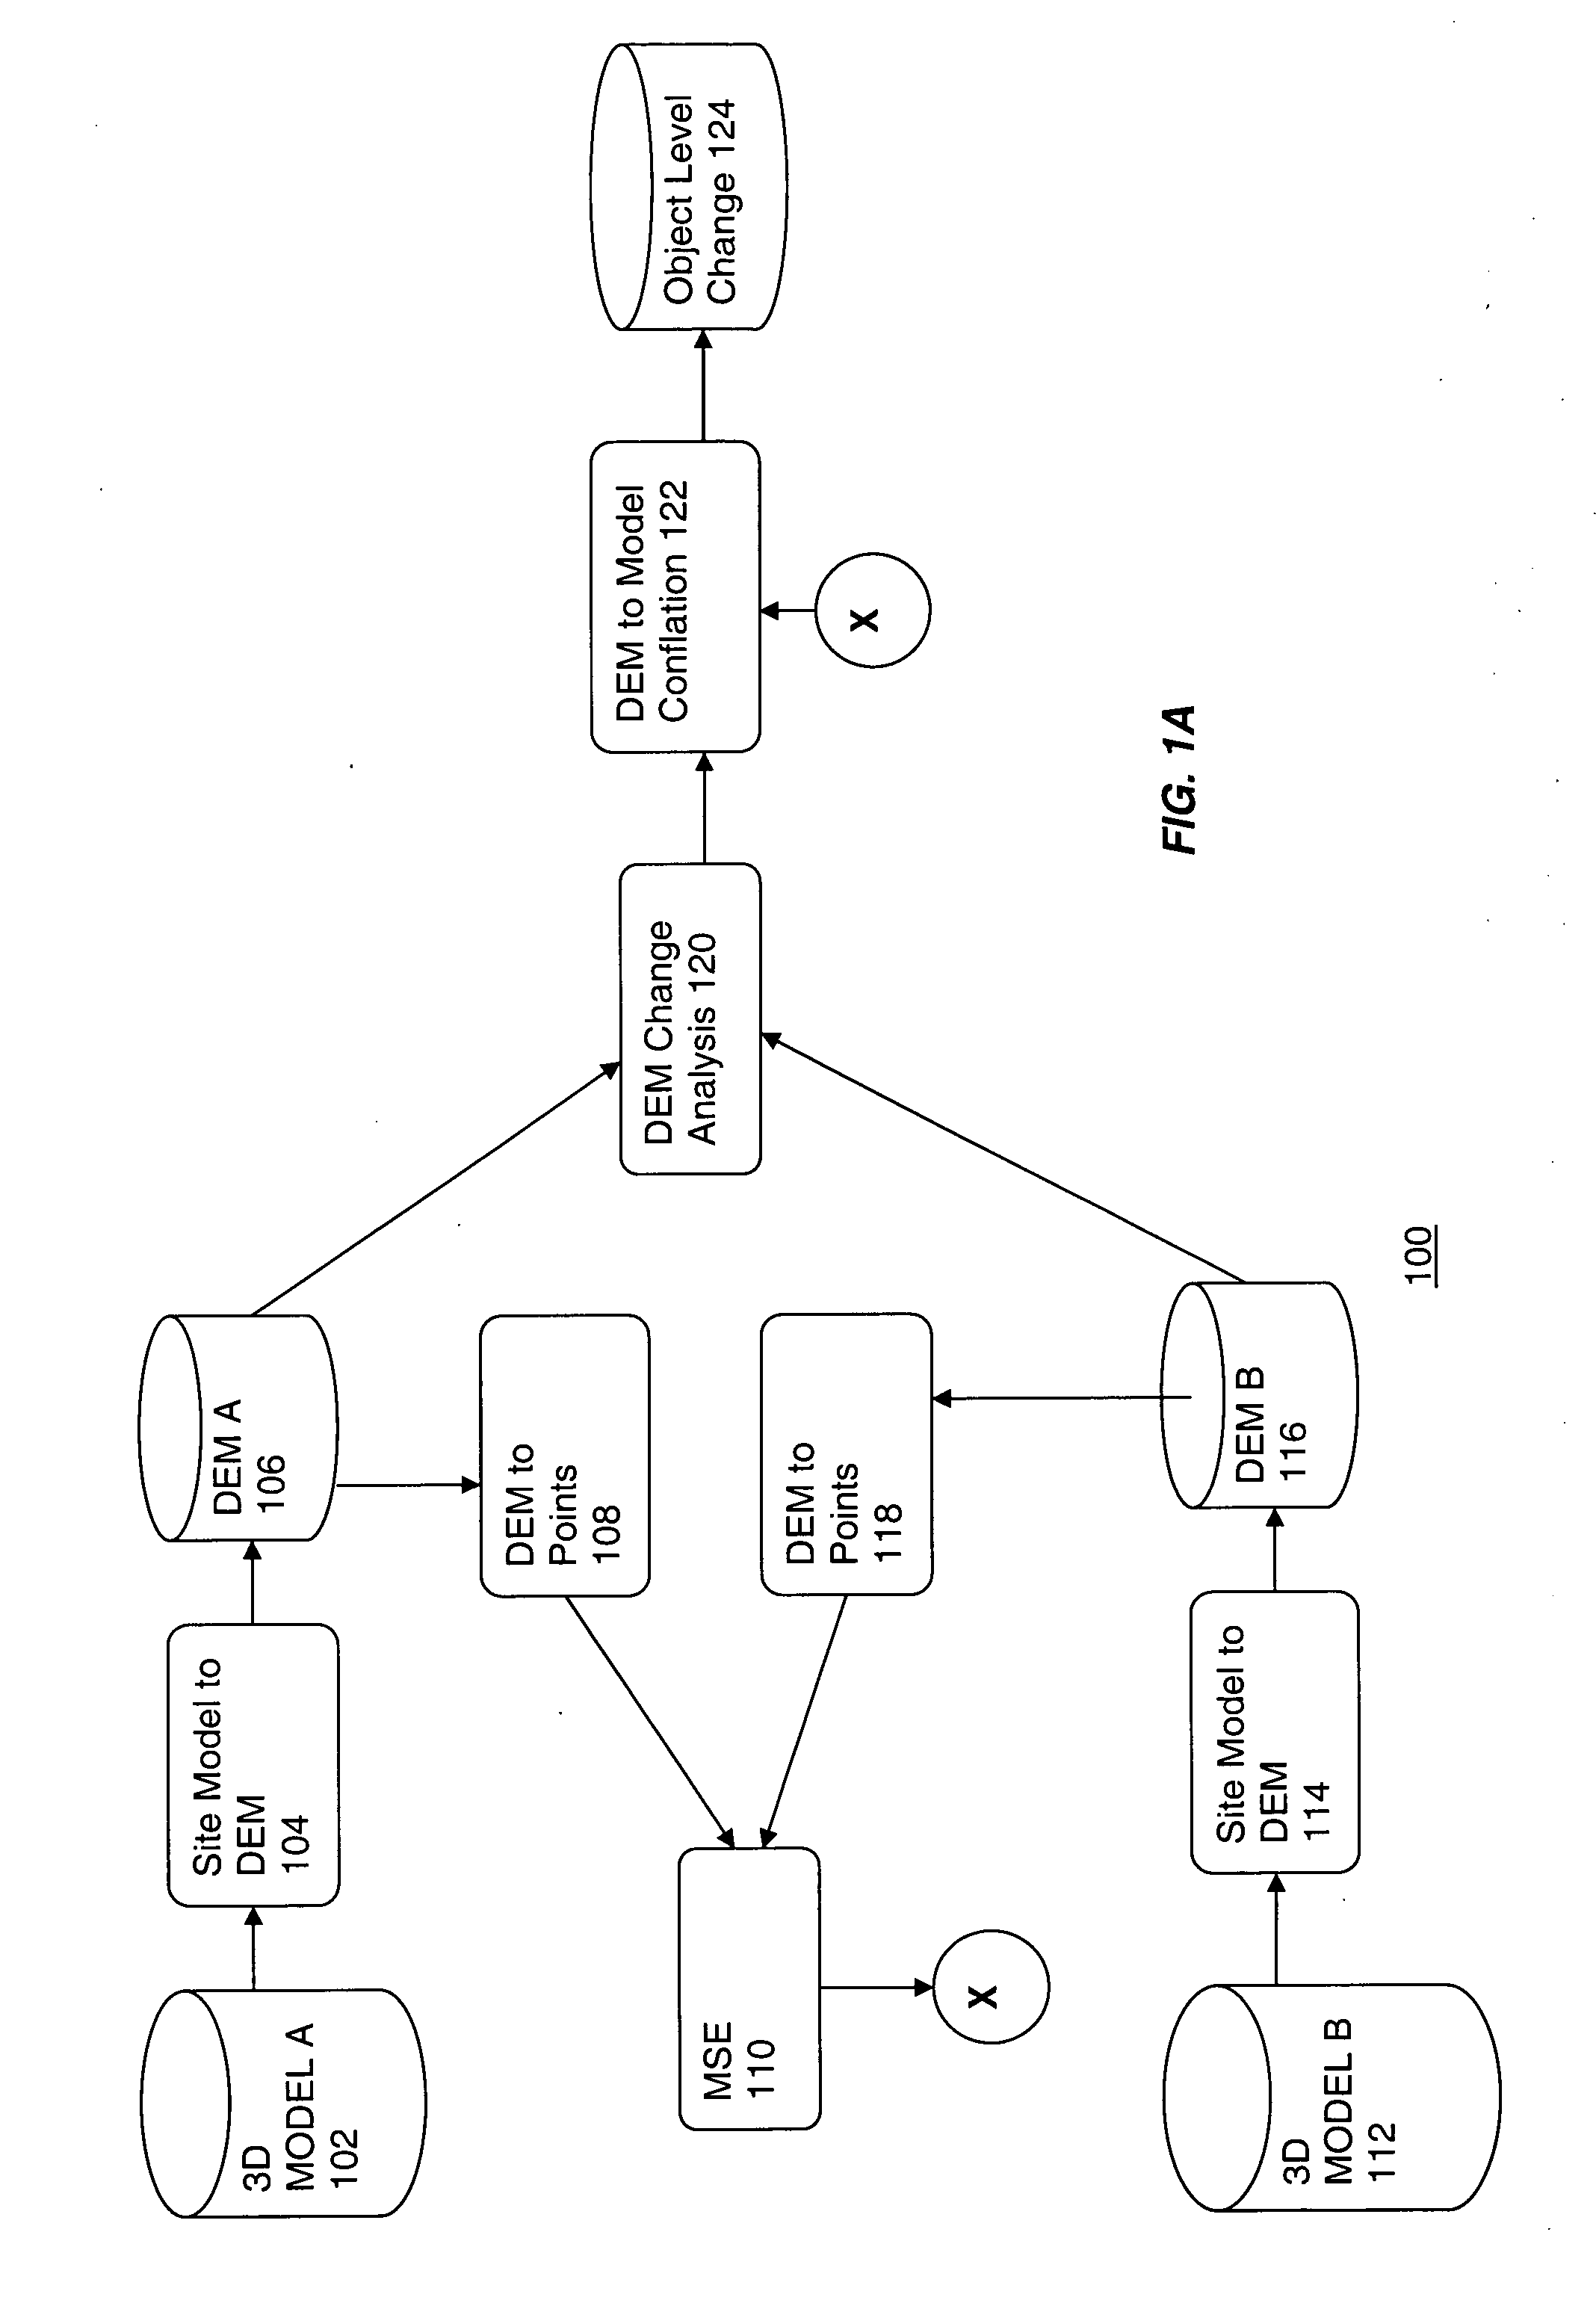 System and method for three dimensional change detection and measurement of a scene using change analysis